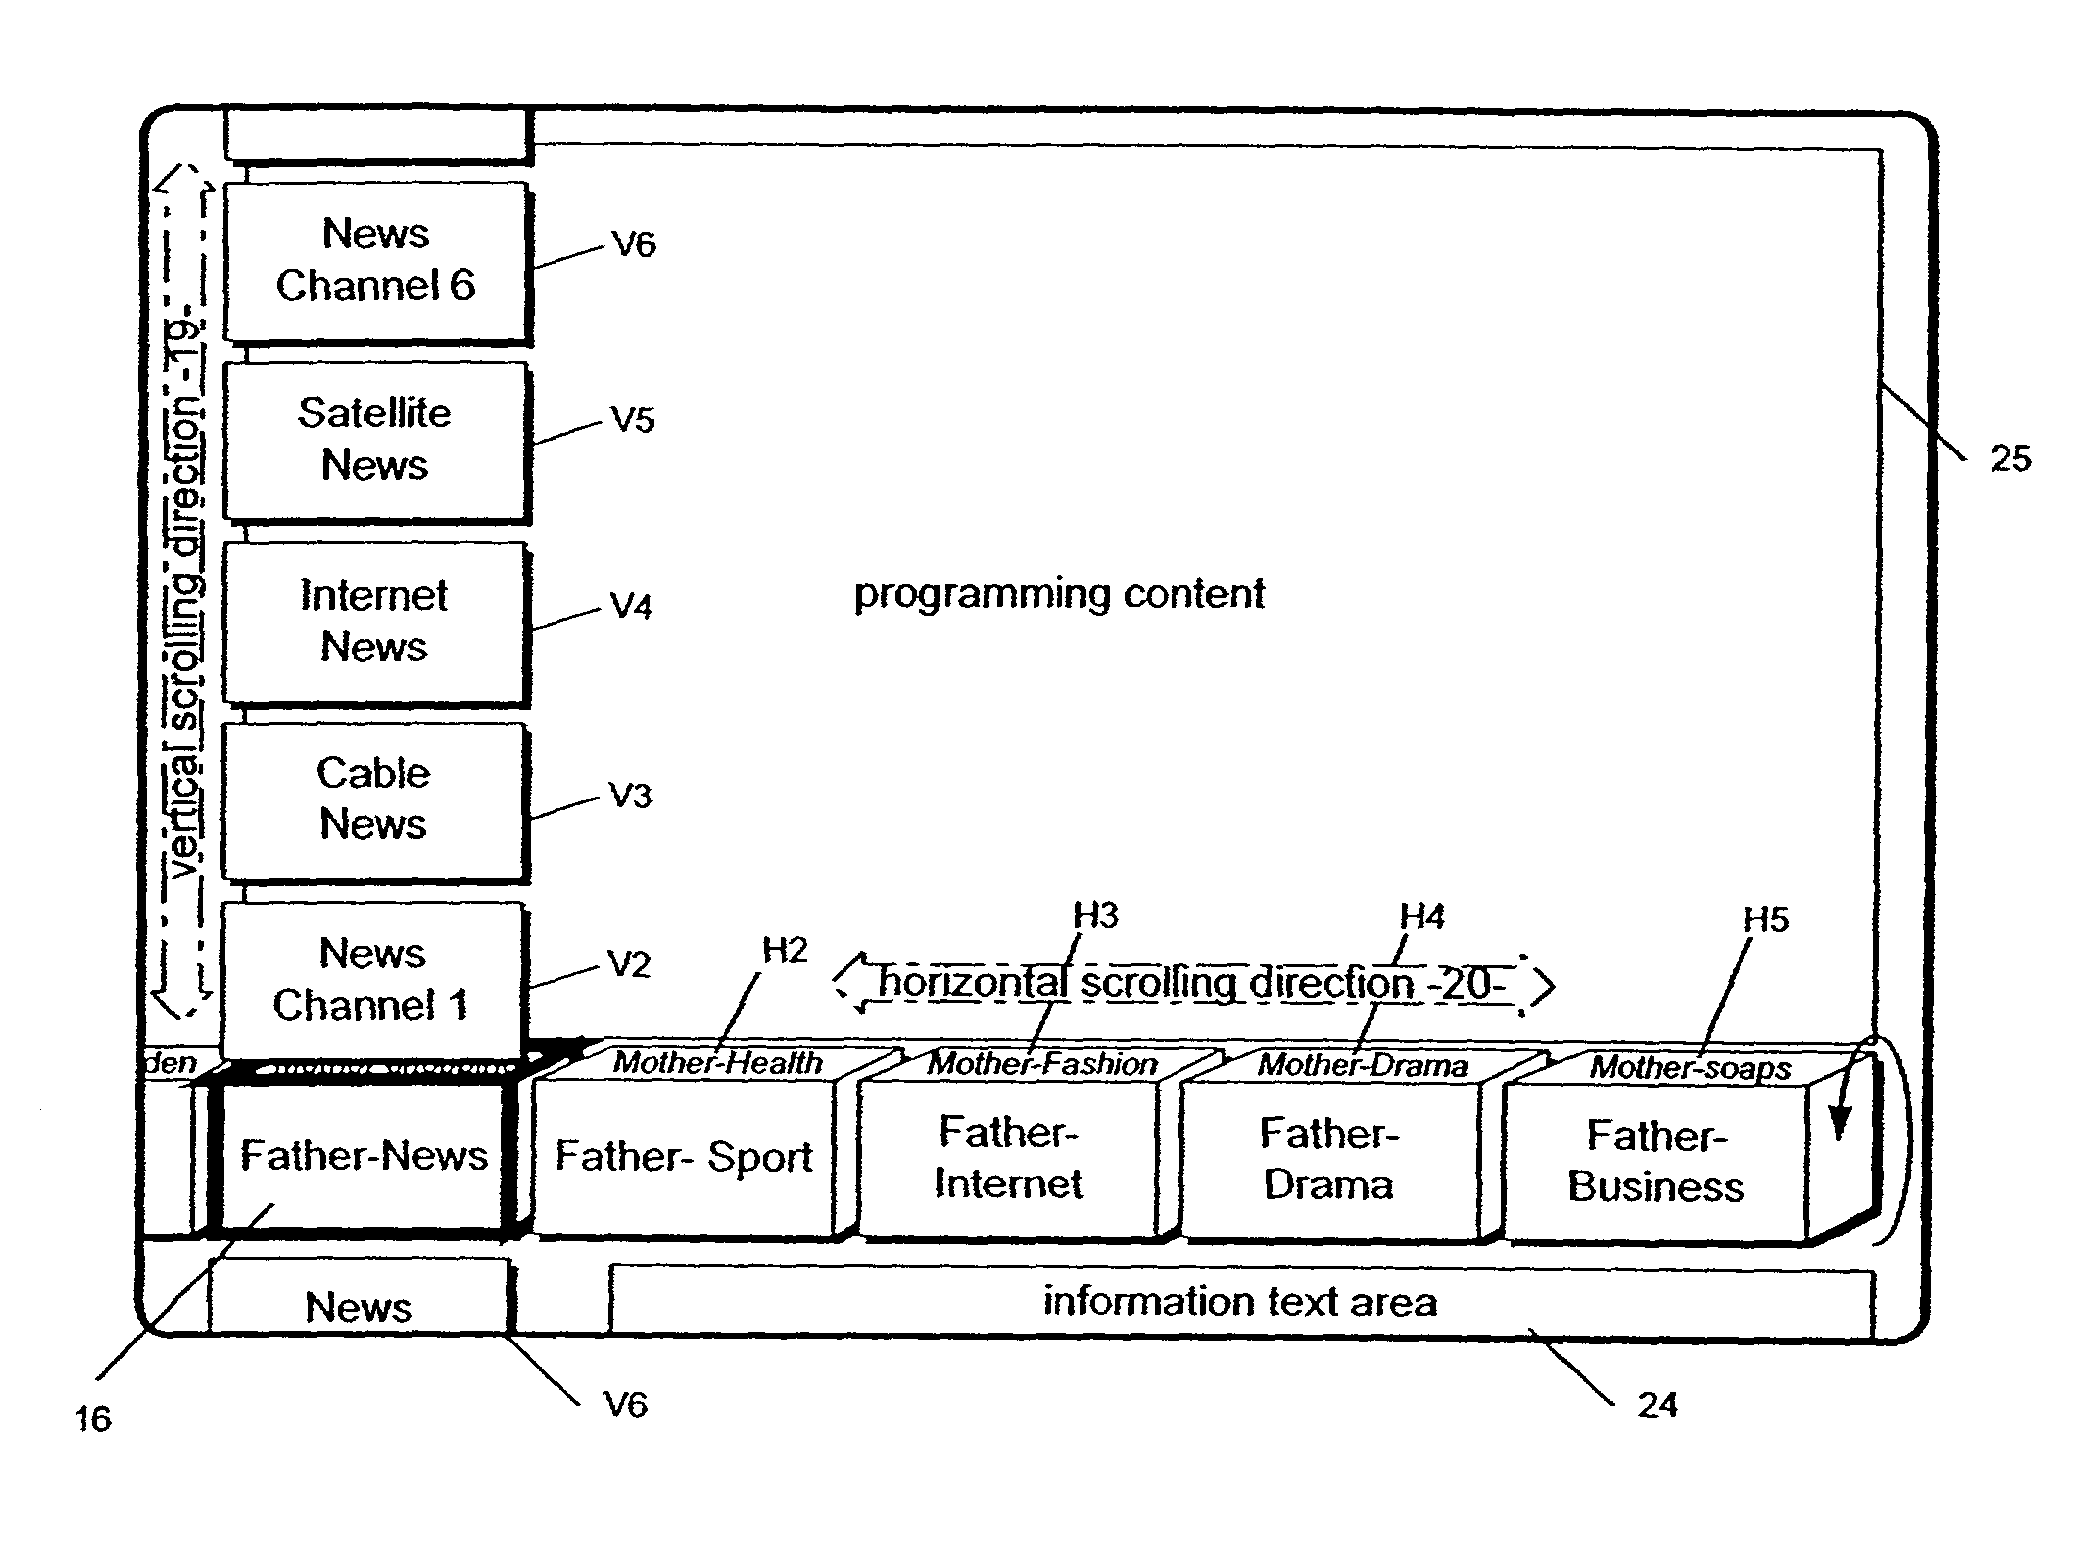 Graphical user interface comprising intersecting scroll bar for selection of content